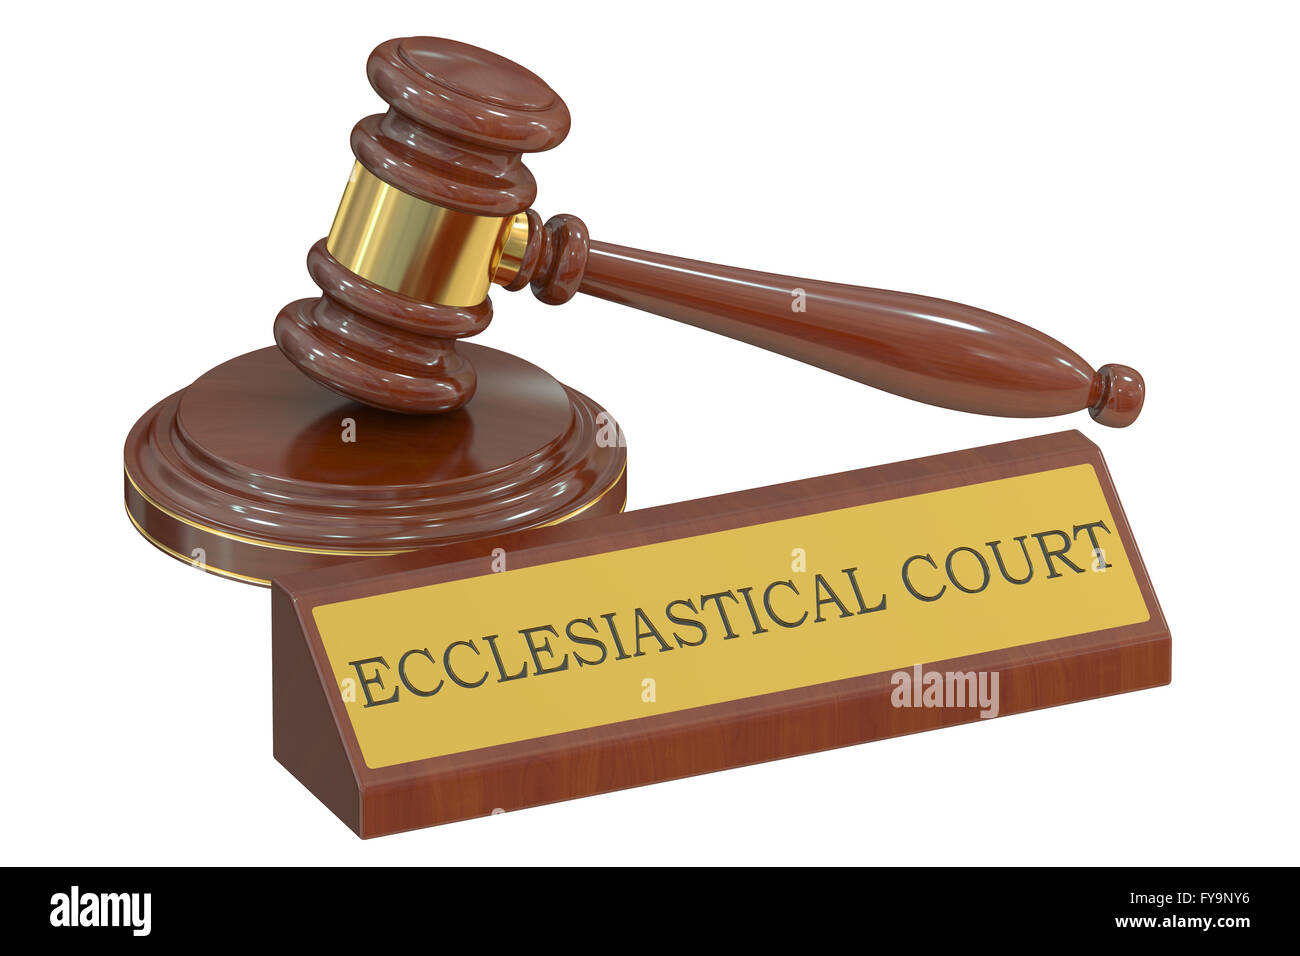 ecclesiastical court concept with gavel. 3D rendering Stock Photo